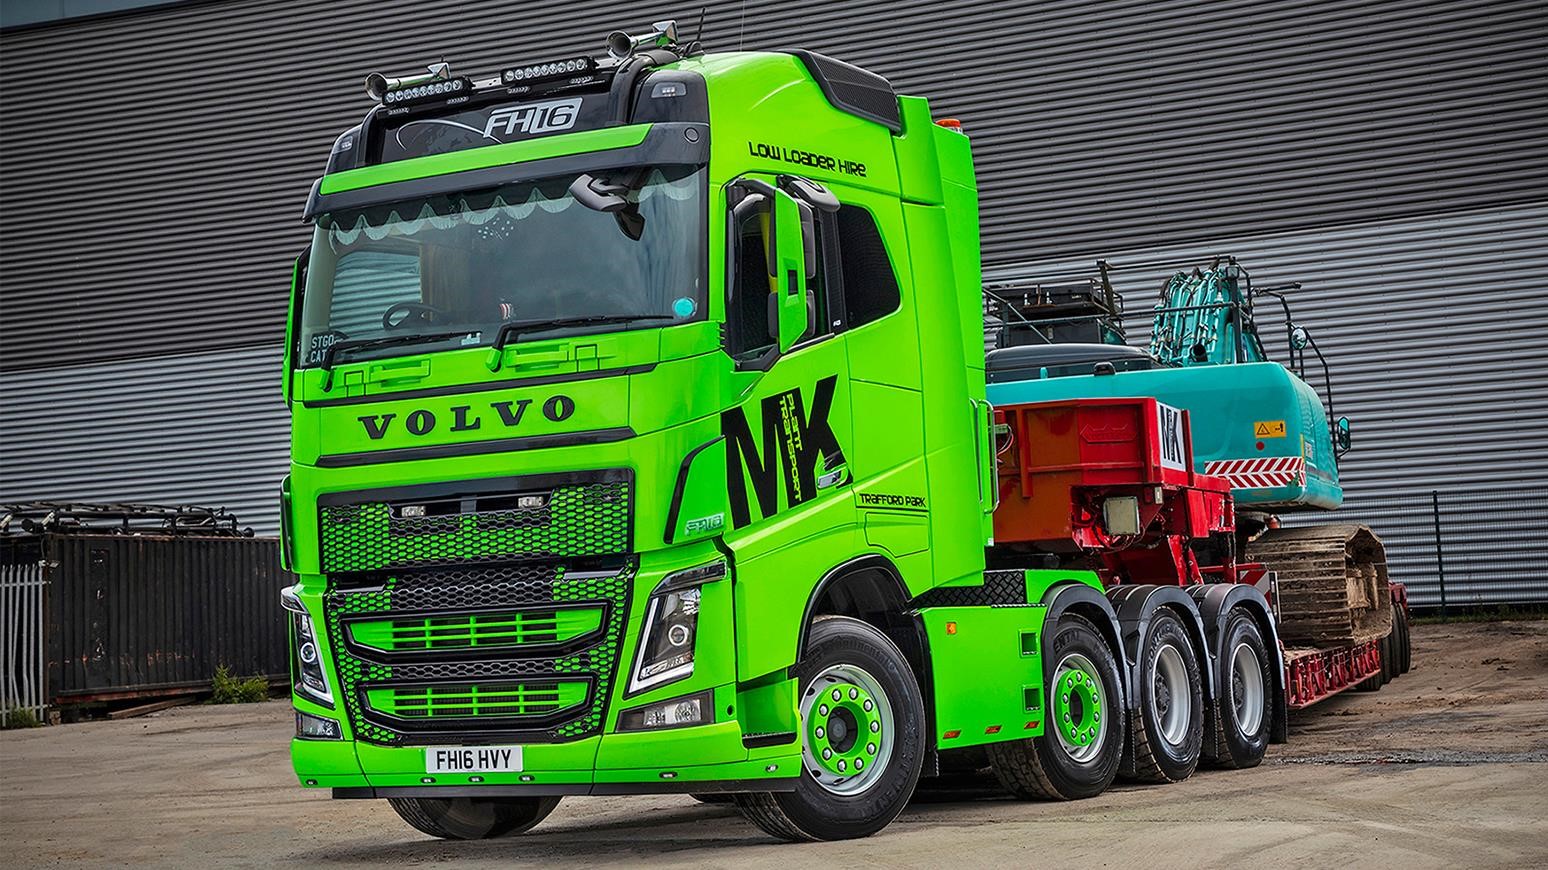 Manchester-Based MK Plant Transport Adds High-Spec Volvo FH16-650 To Its Fleet For Low Loader Applications